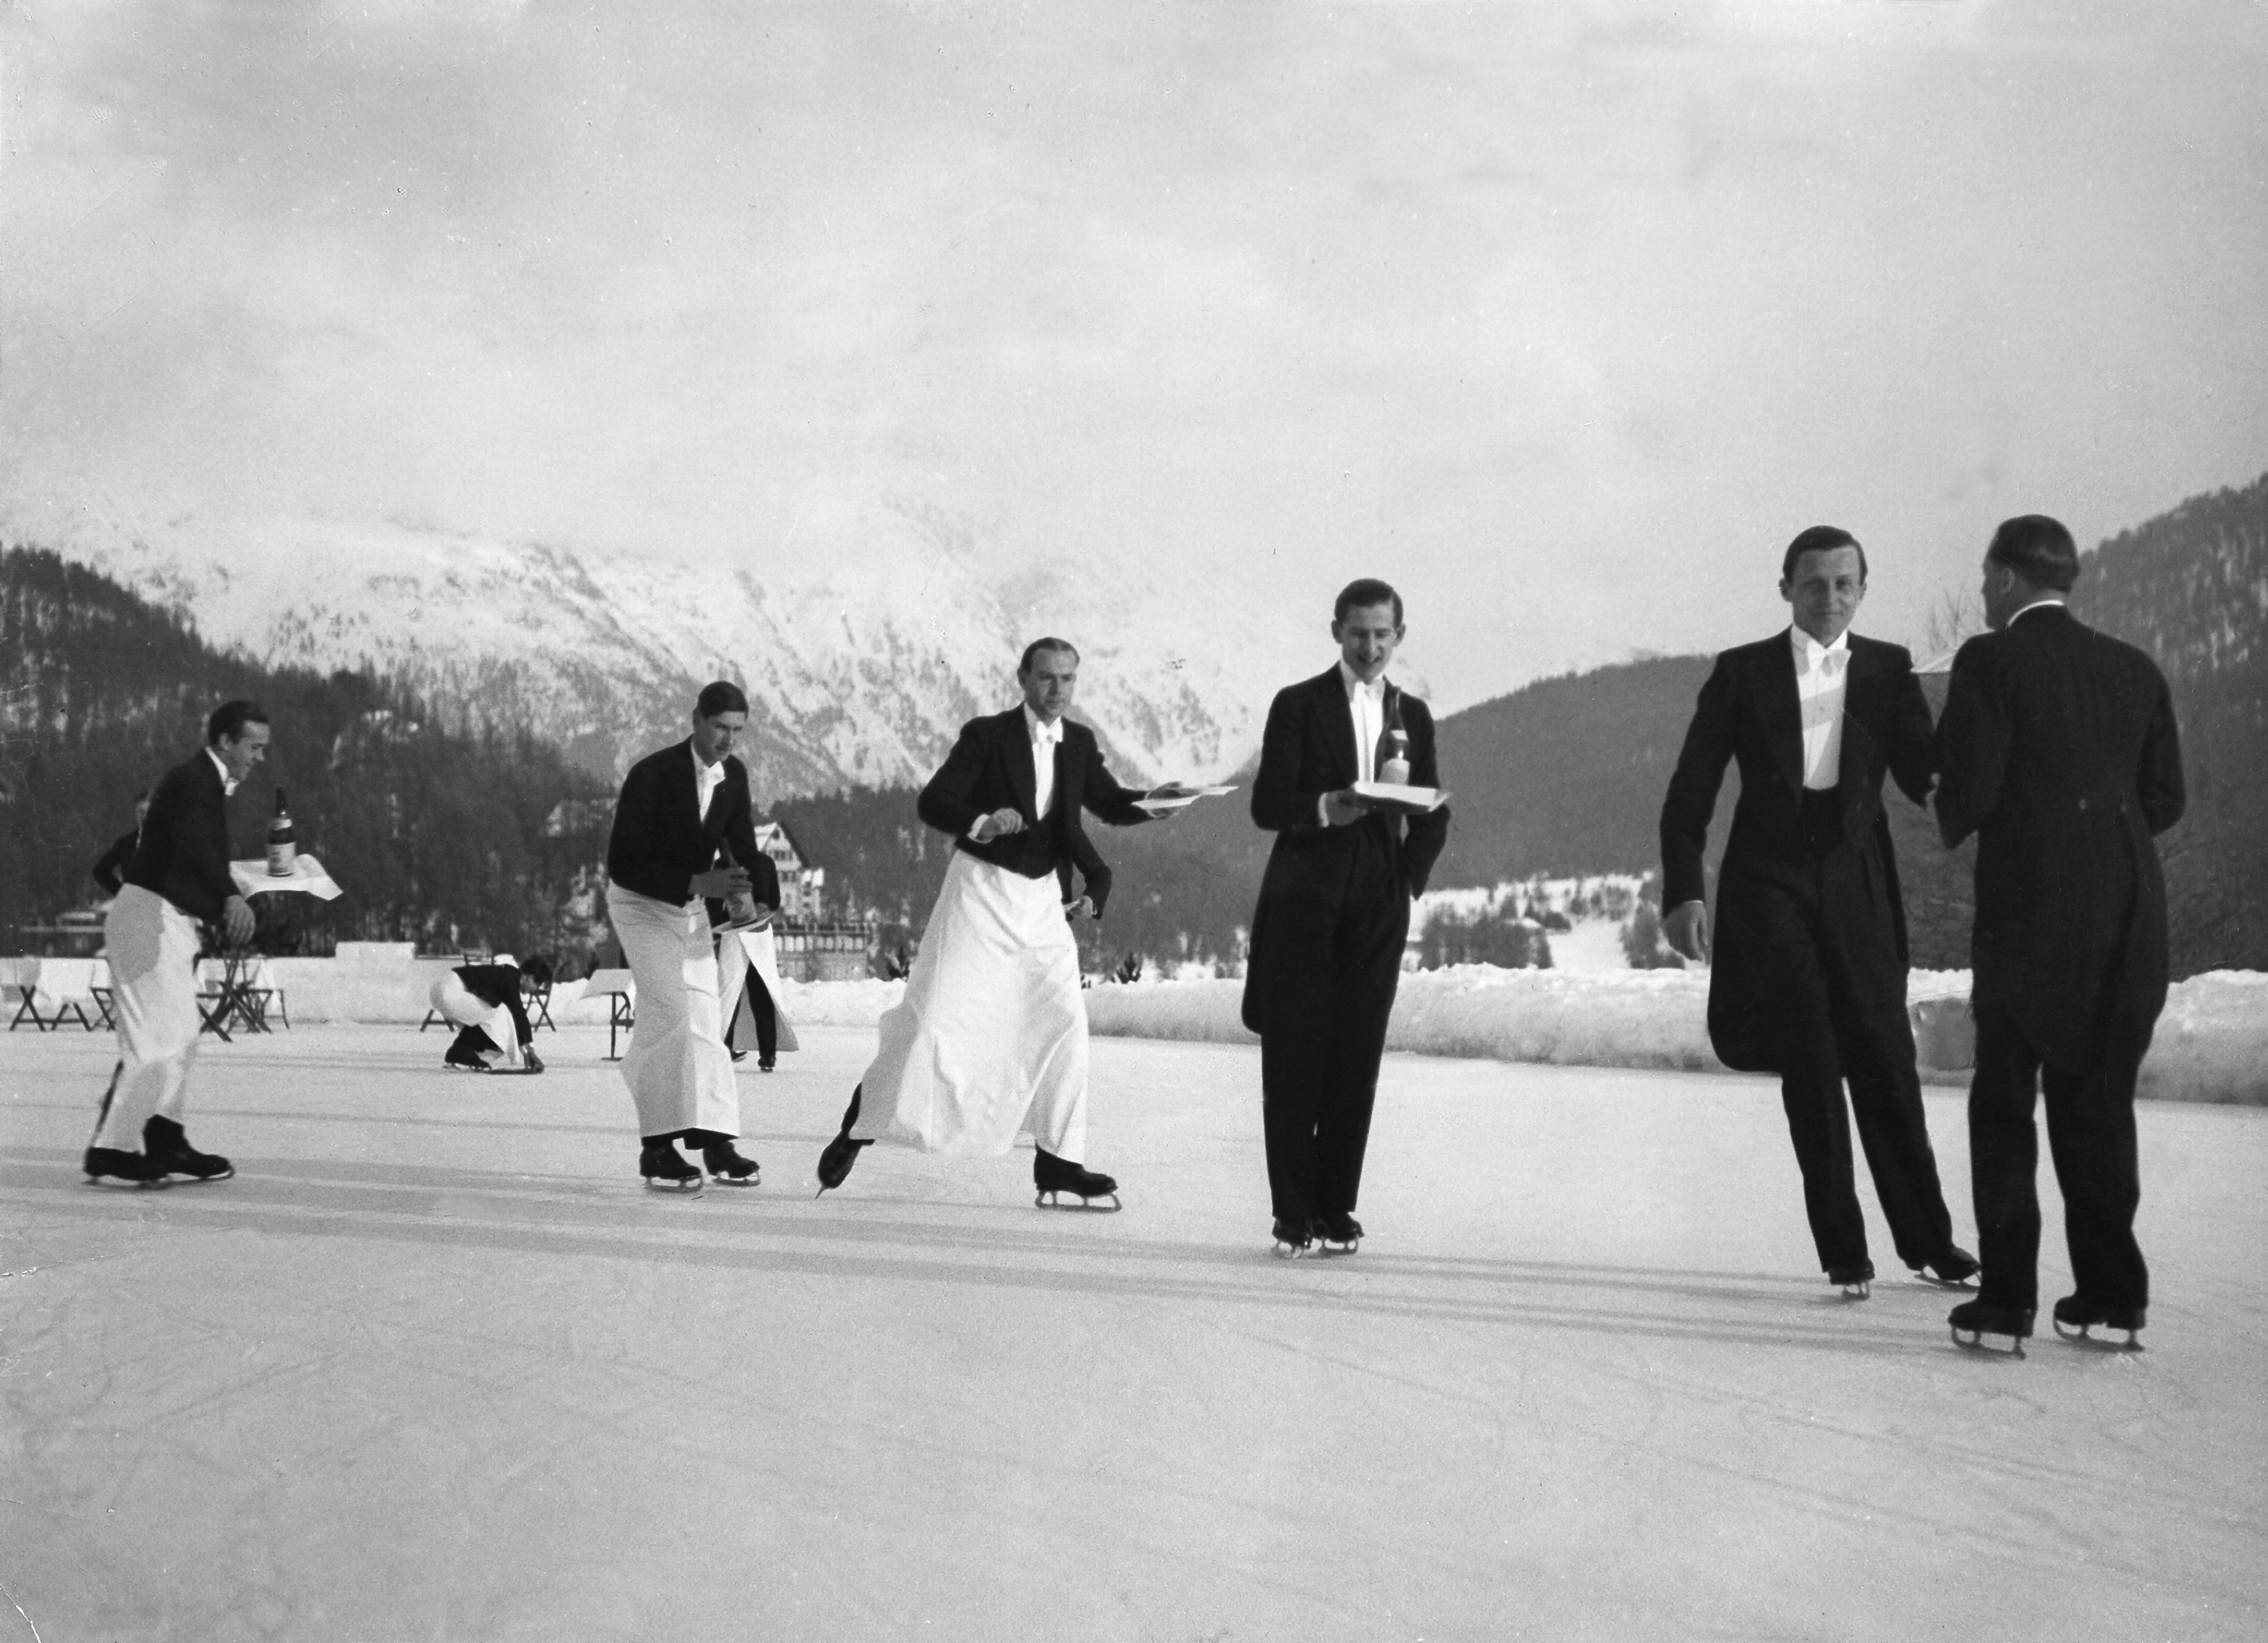 Butlers on ice